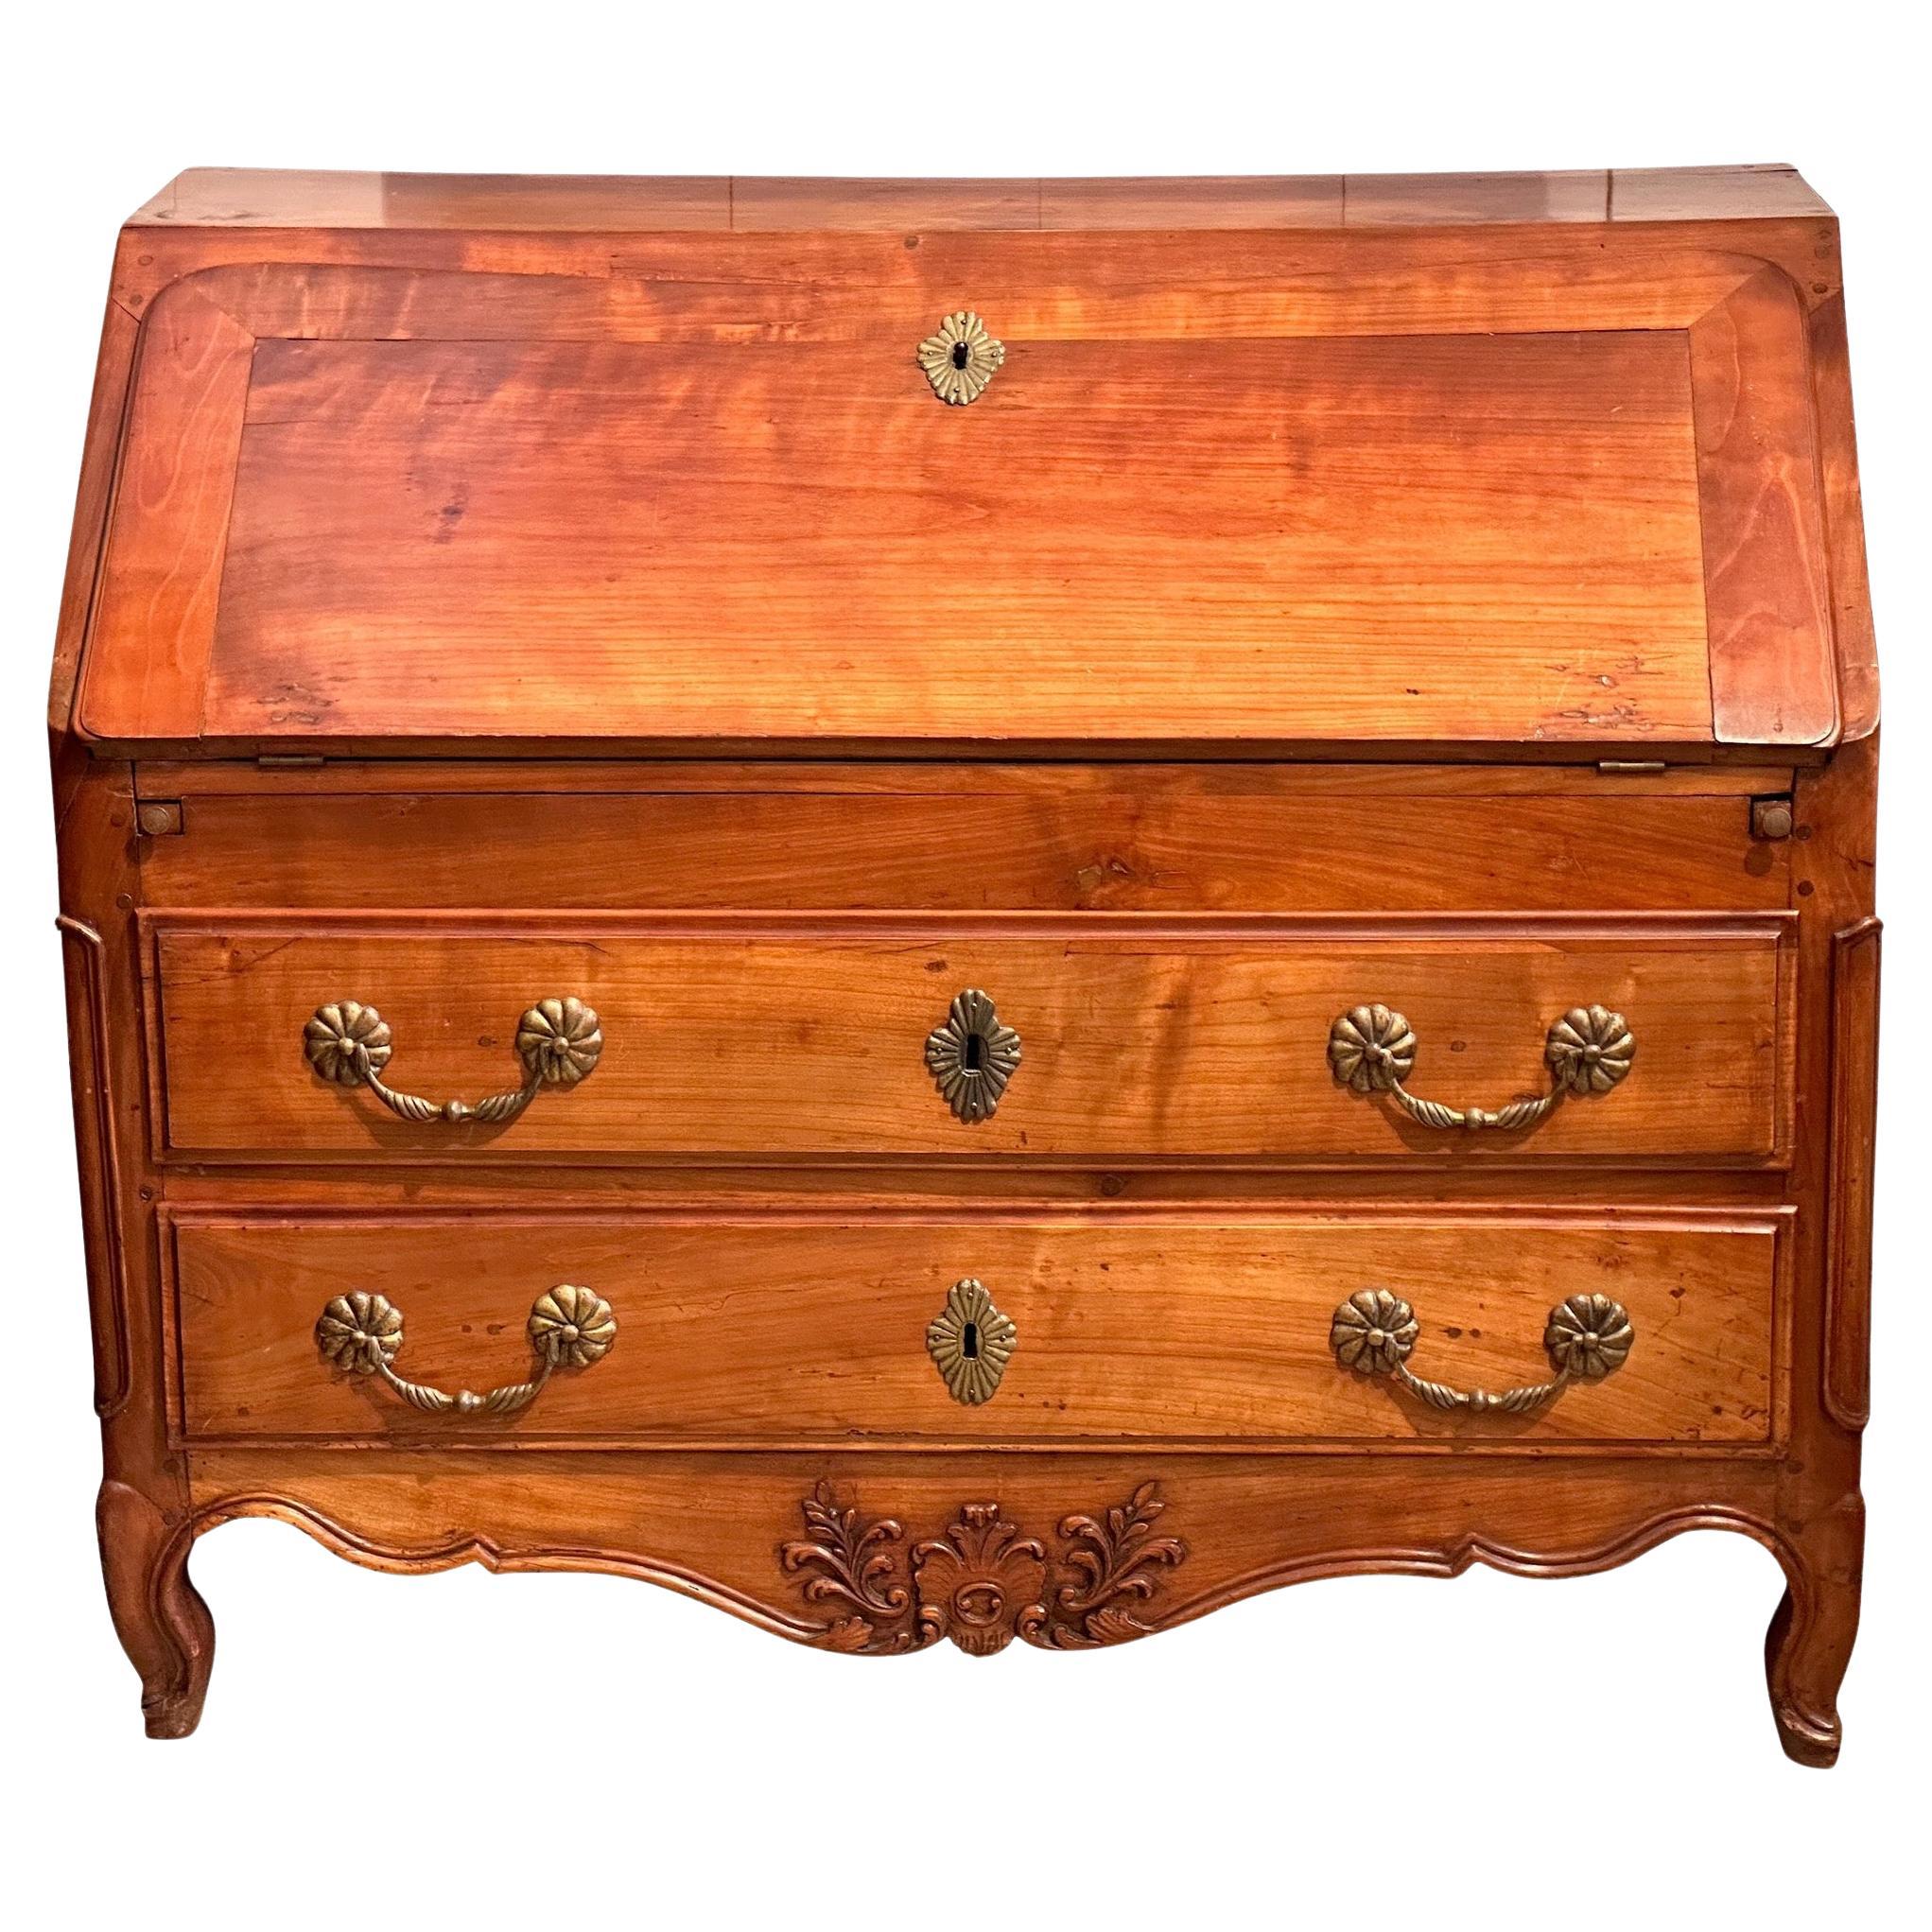 Late 18th Century Antique French Desk